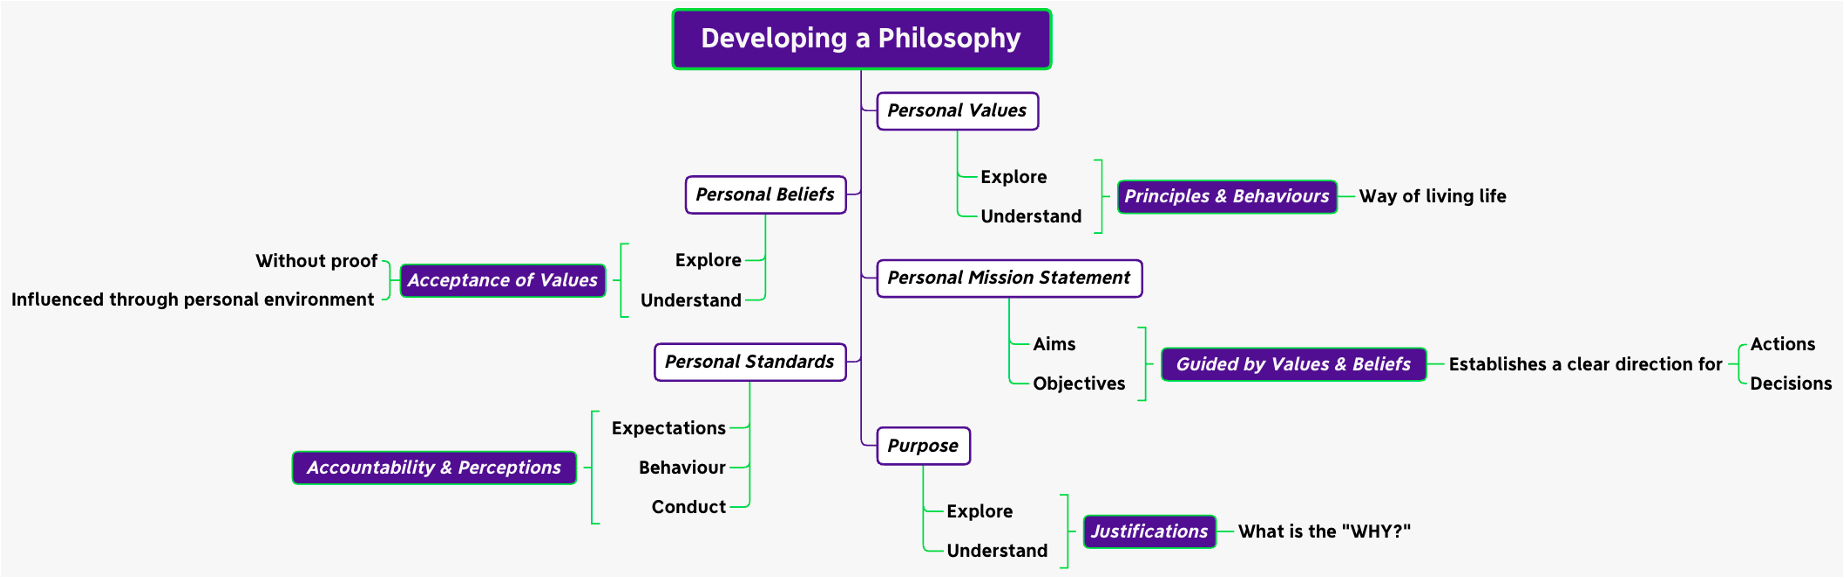 Developing a Philosophy for Life & Coaching